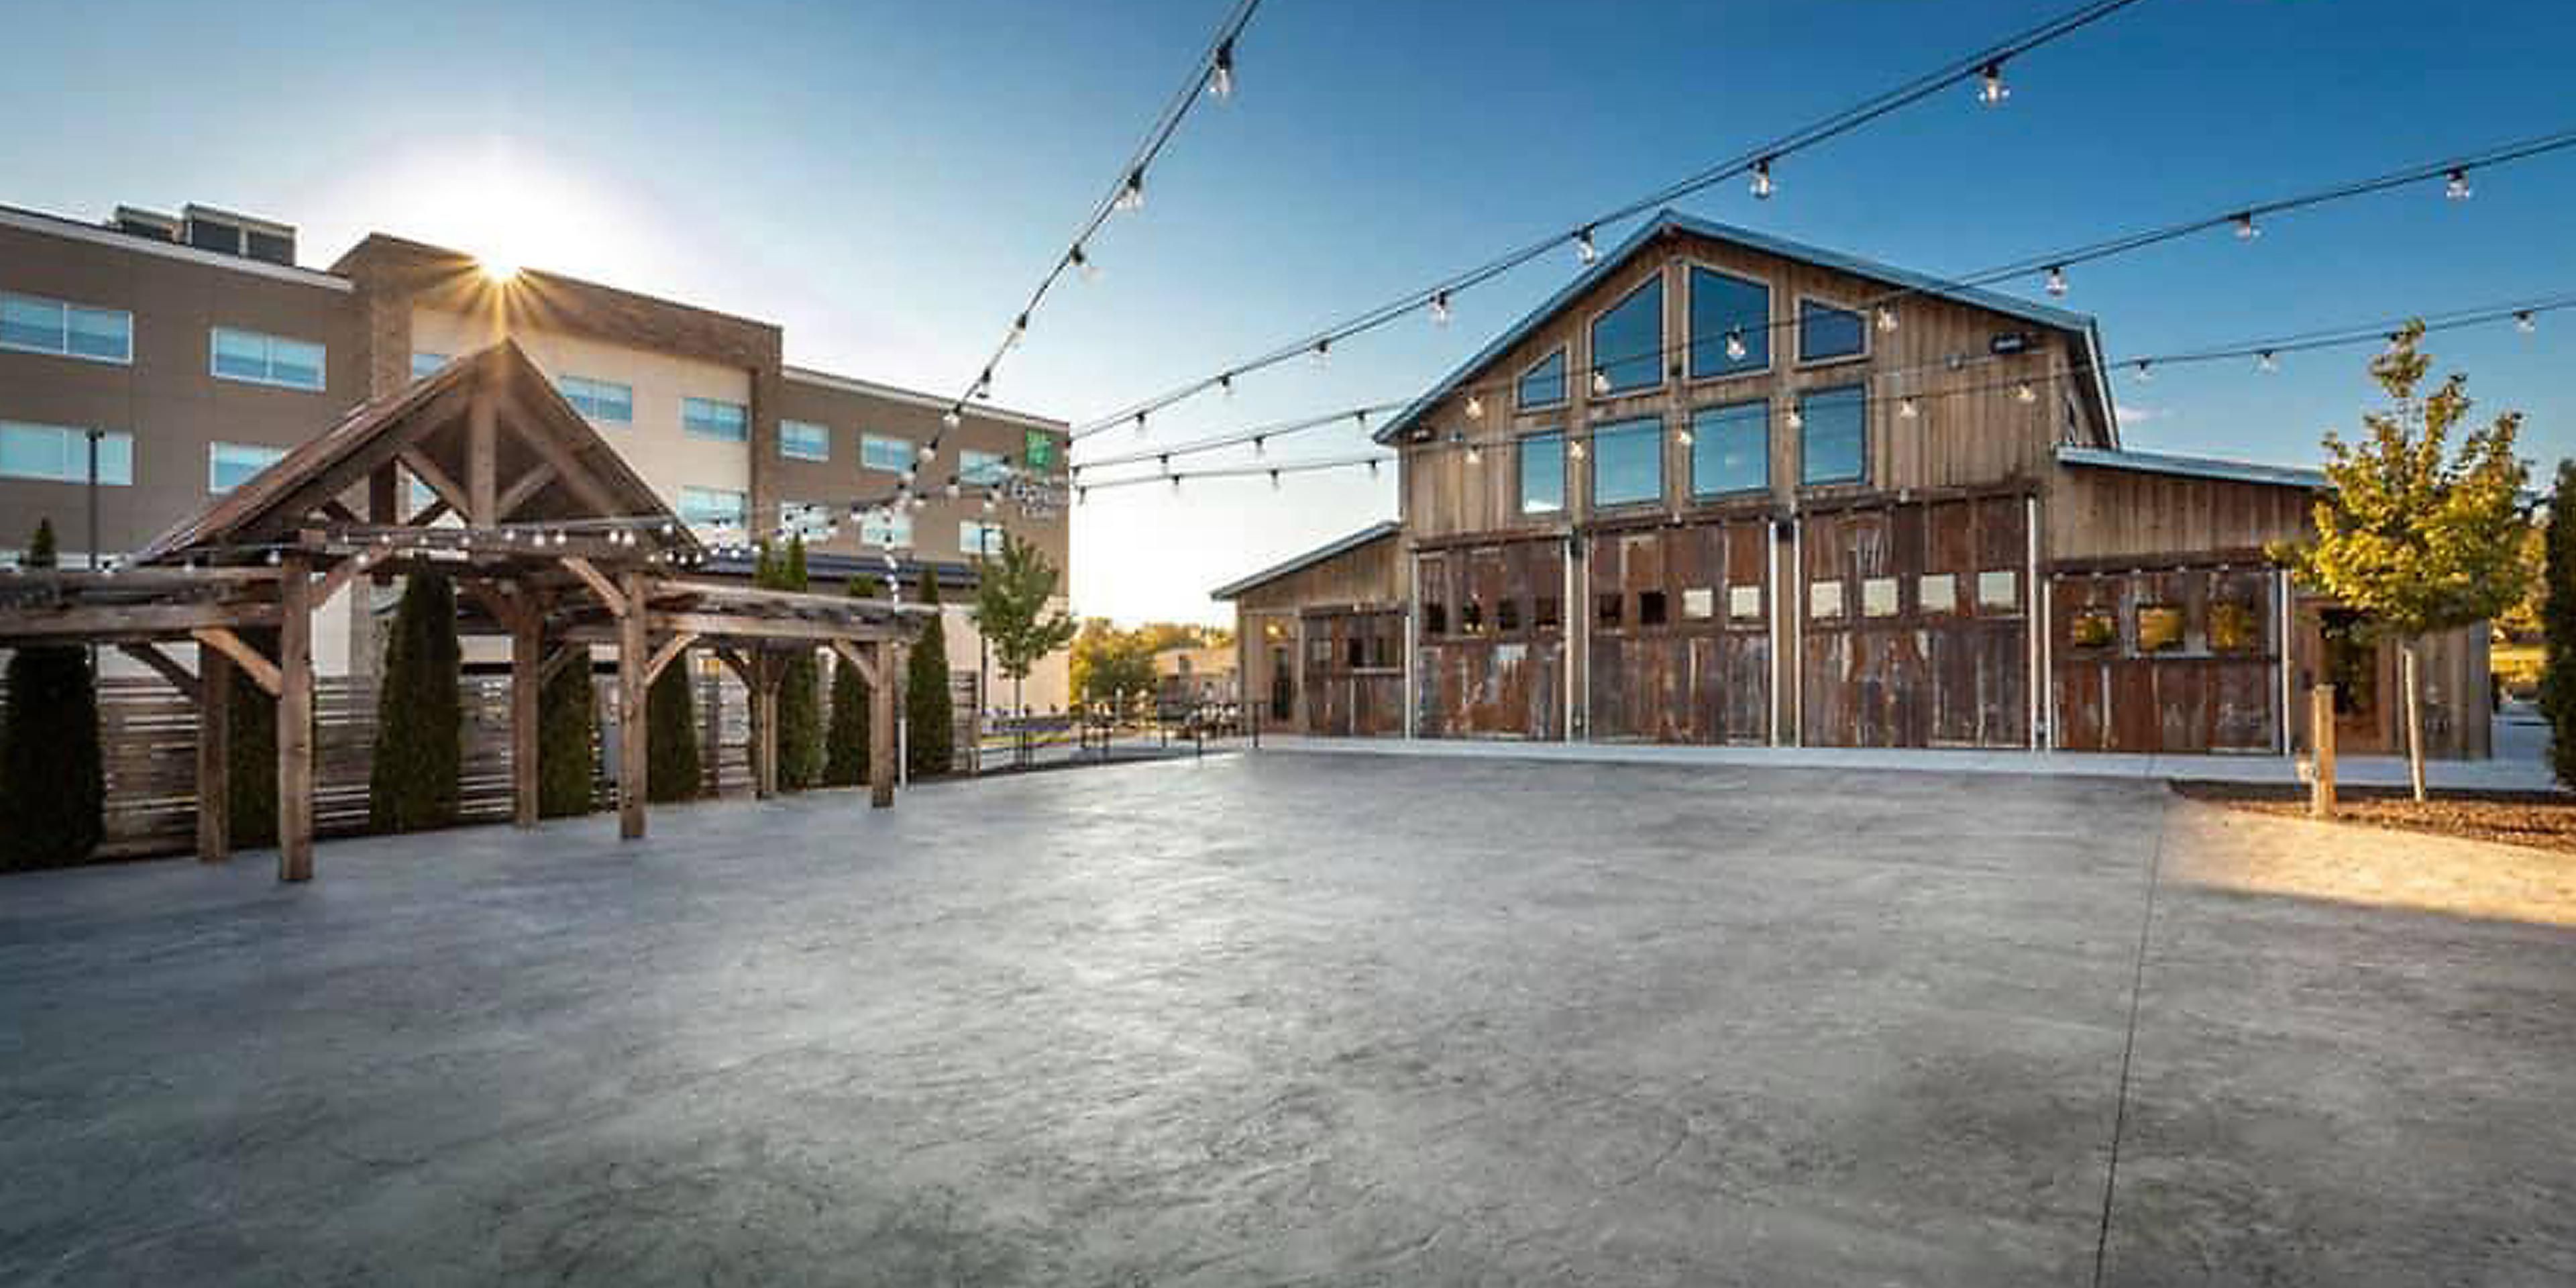 Located on property, our Barley House Barn and Event Center is the perfect place to host your next wedding, corporate event, or celebration. Contact us today to book your event or room block.